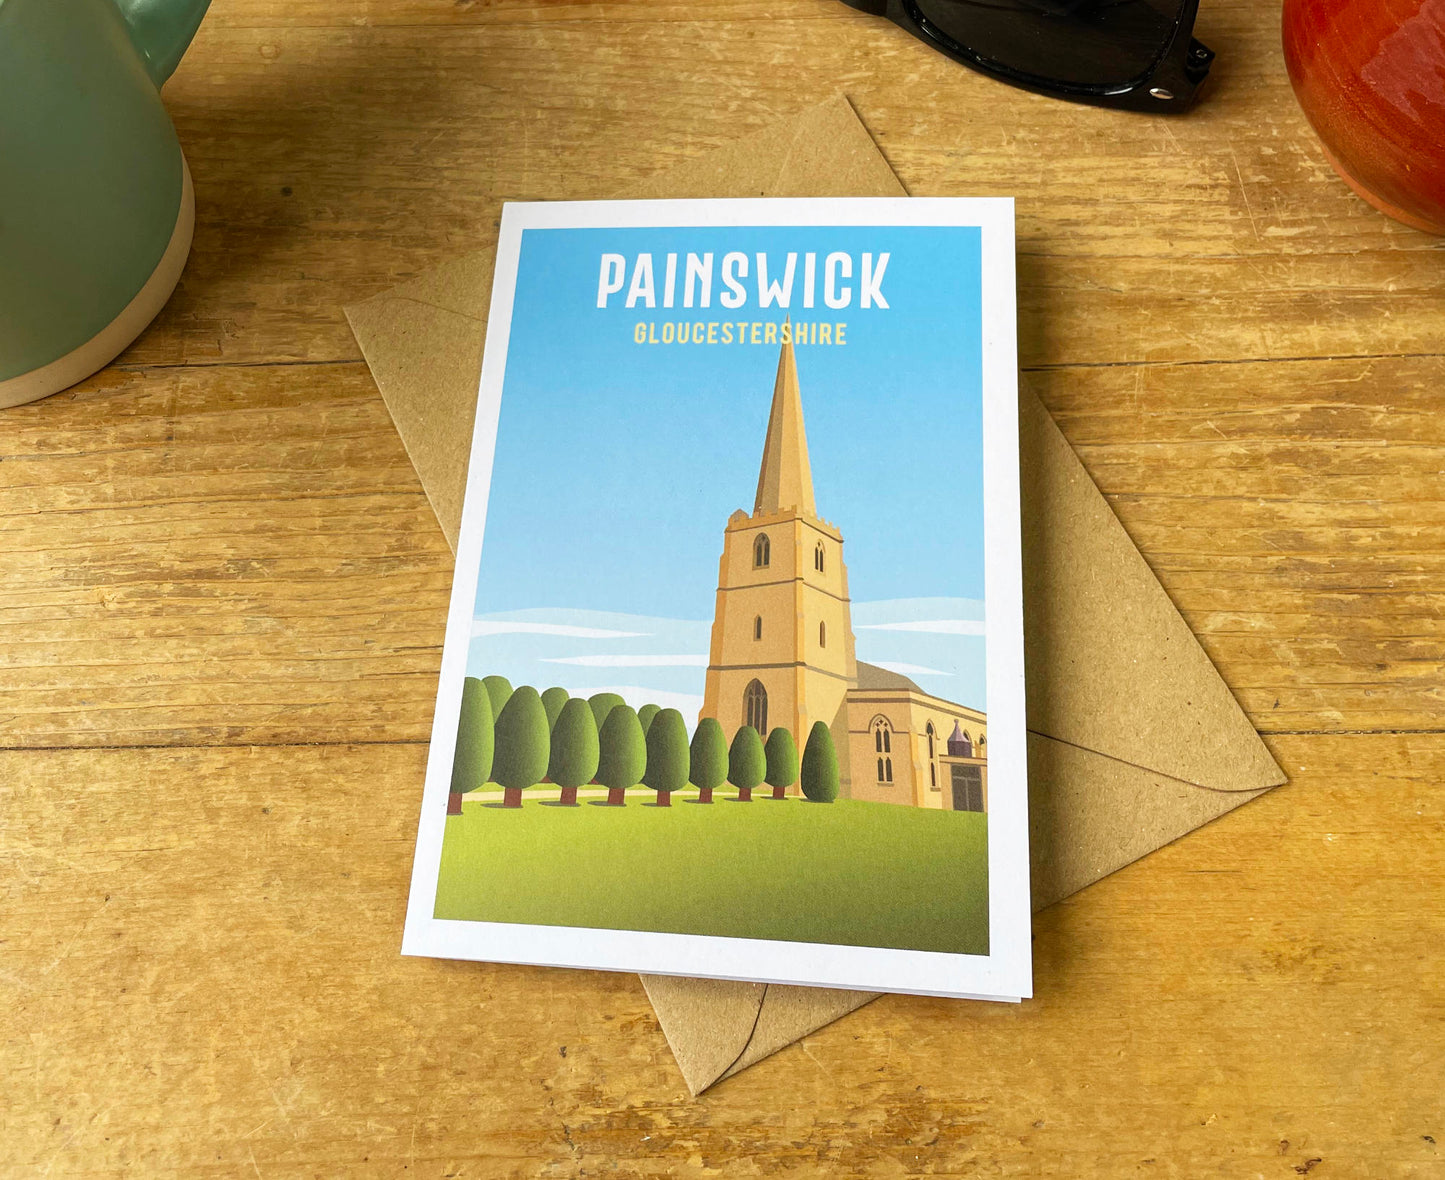 Painswick Church Greeting Card on table